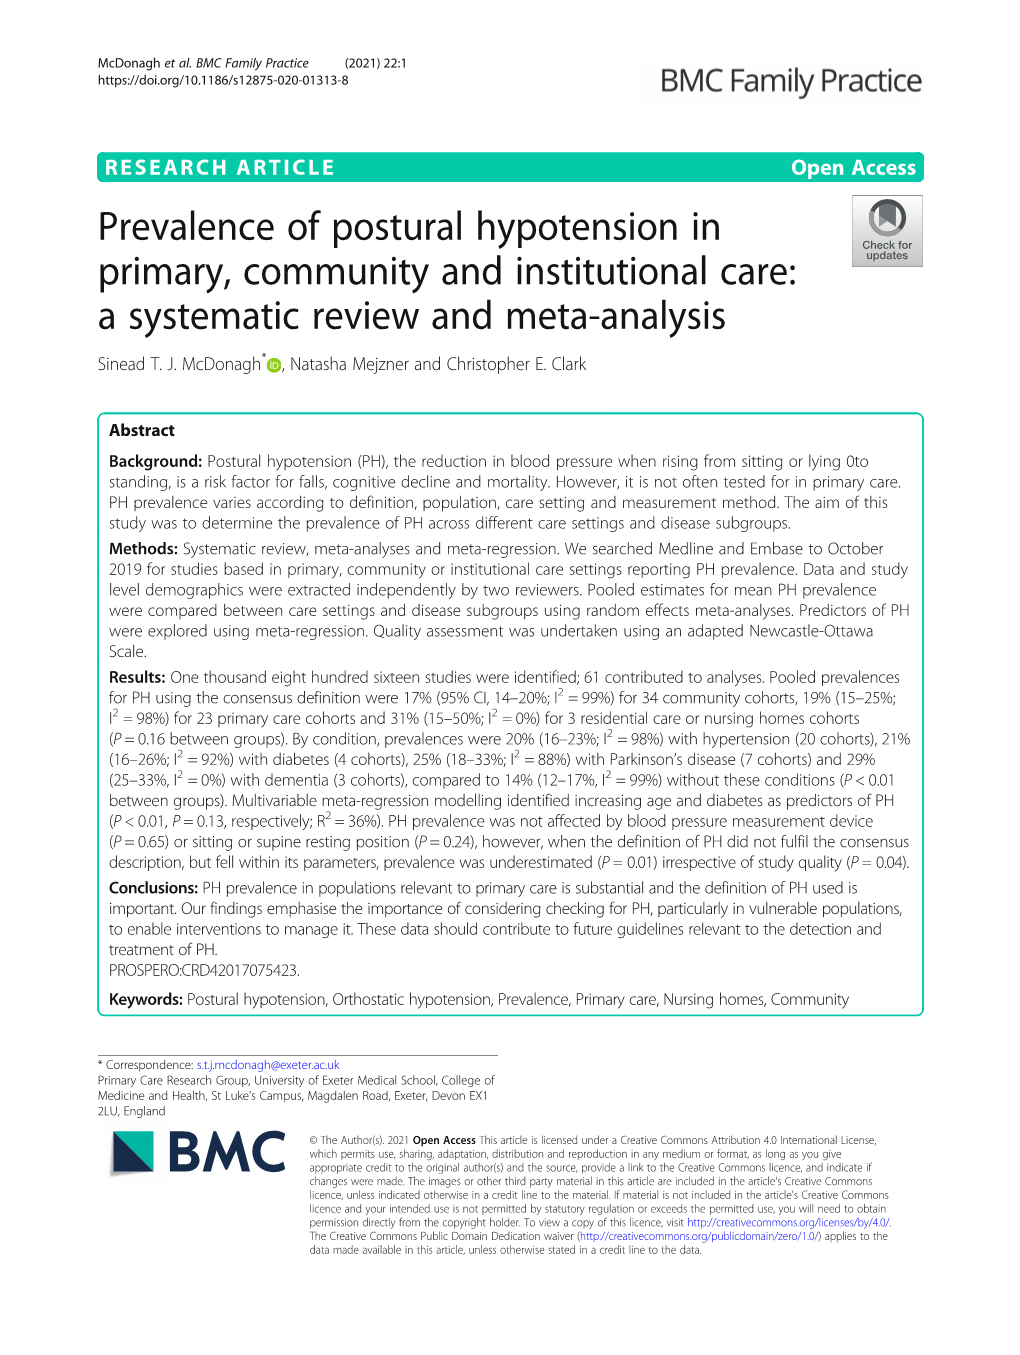 Prevalence of Postural Hypotension in Primary, Community and Institutional Care: a Systematic Review and Meta-Analysis Sinead T